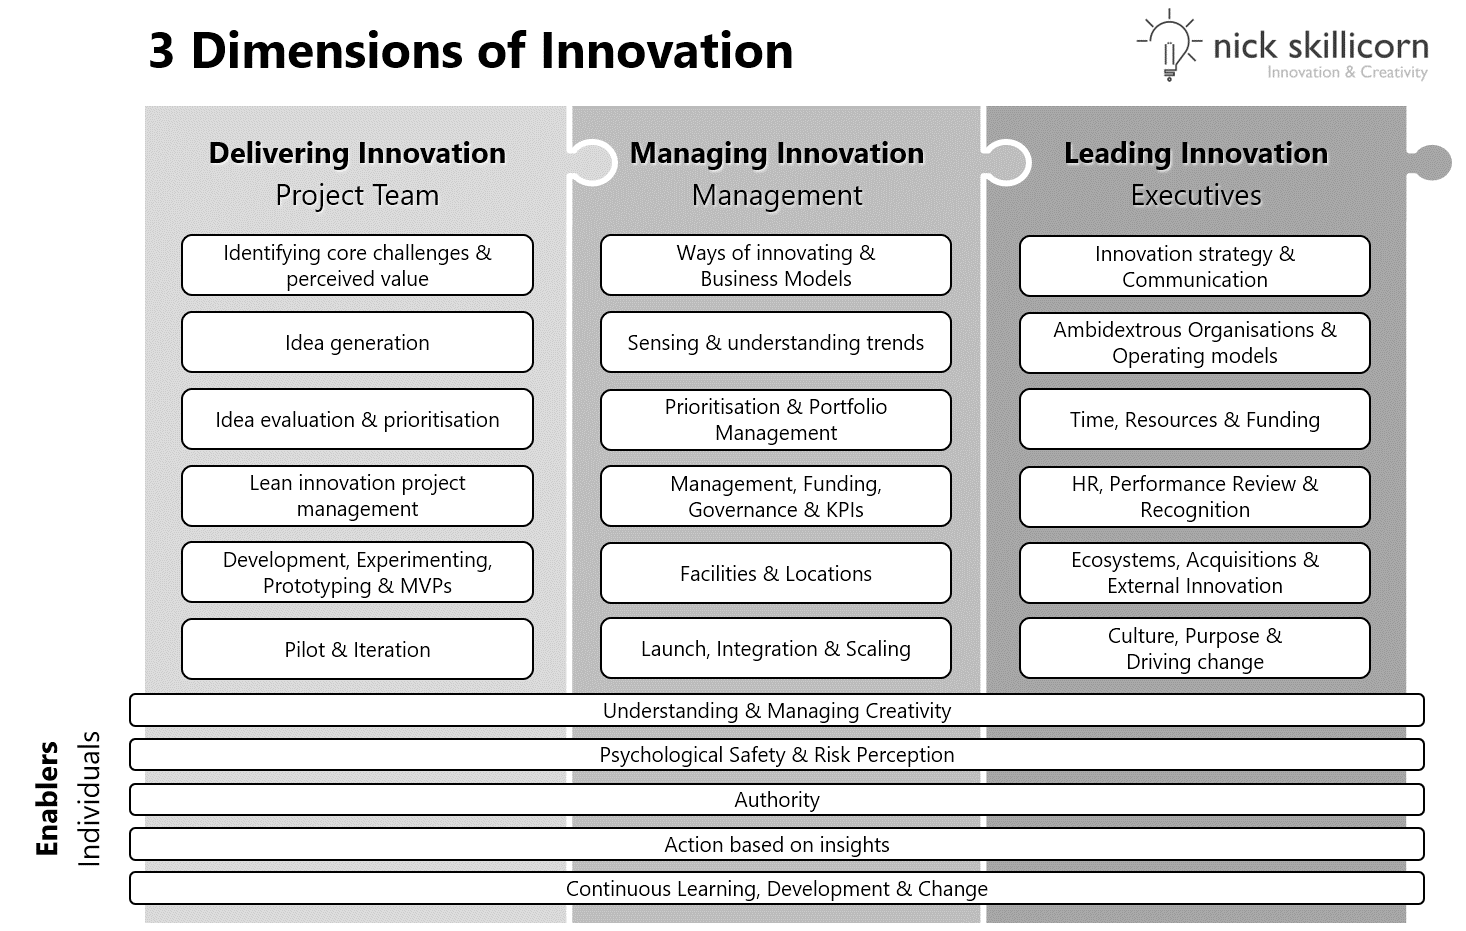 23 core capabilities required to innovate: 3 Dimensions of Innovation by Nick Skillicorn